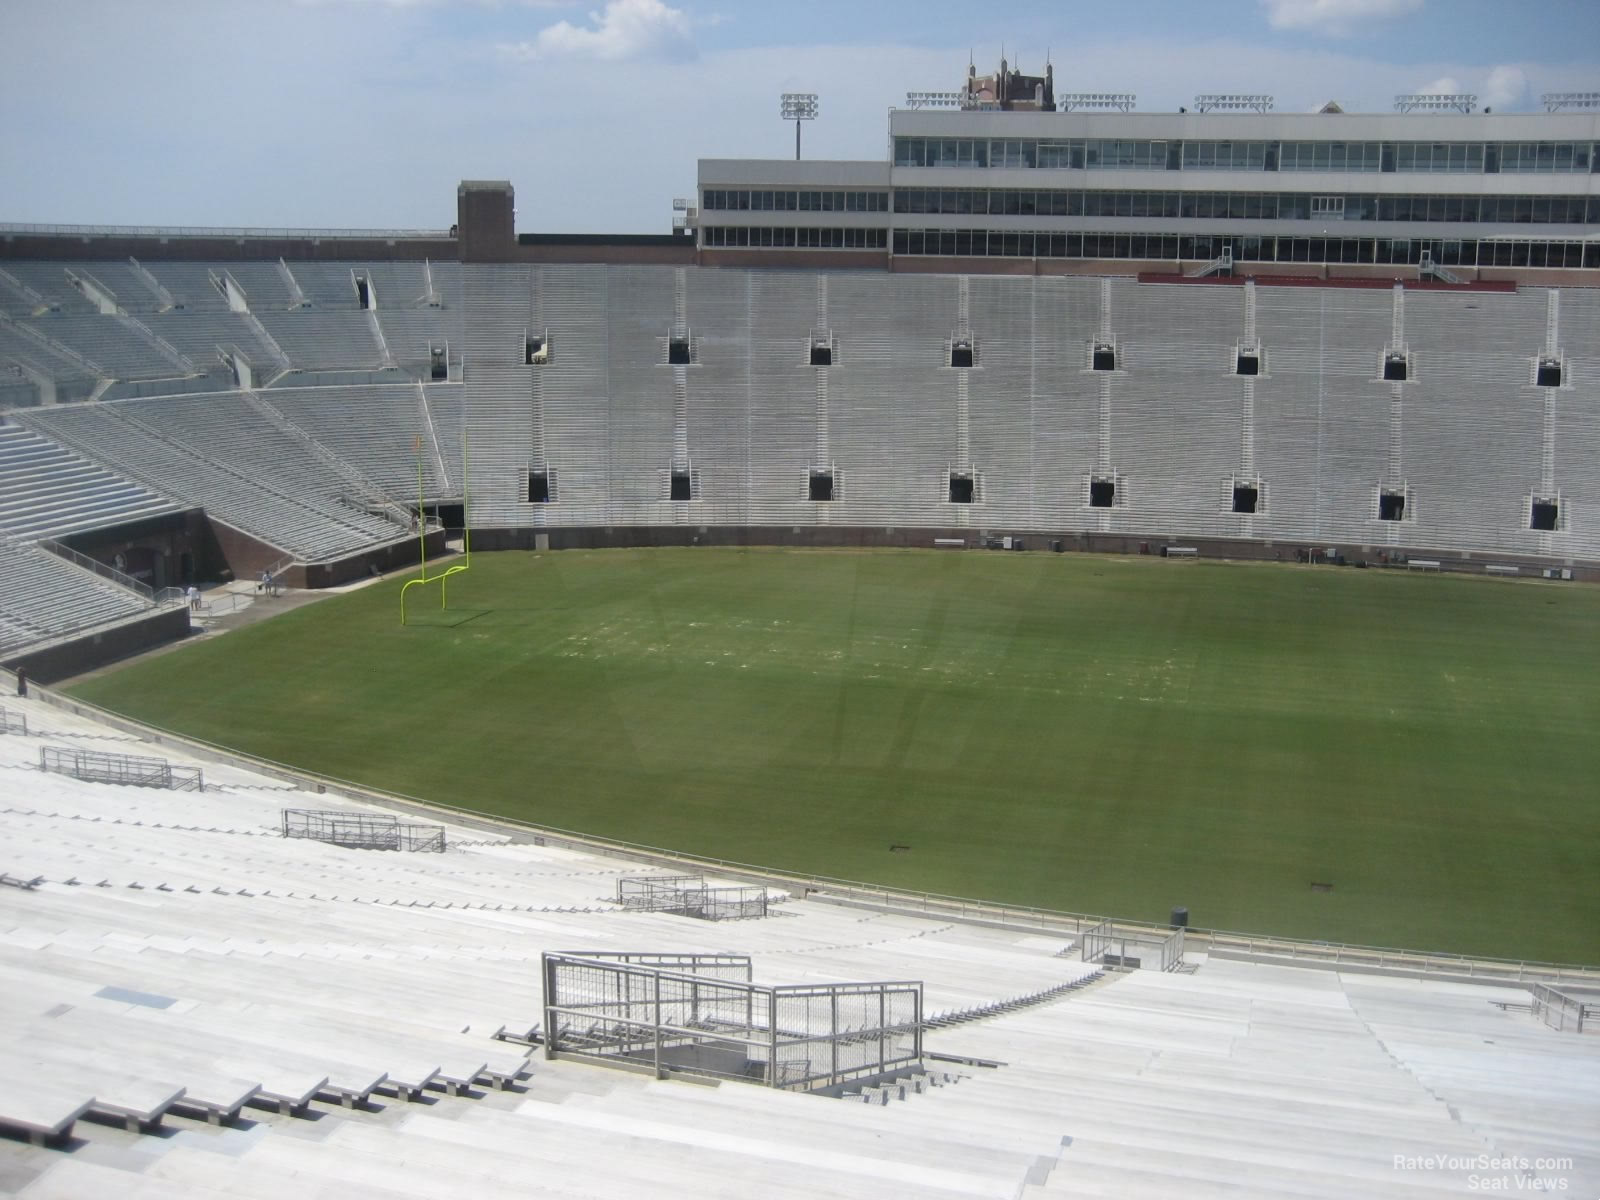 section 10, row 77 seat view  - doak campbell stadium